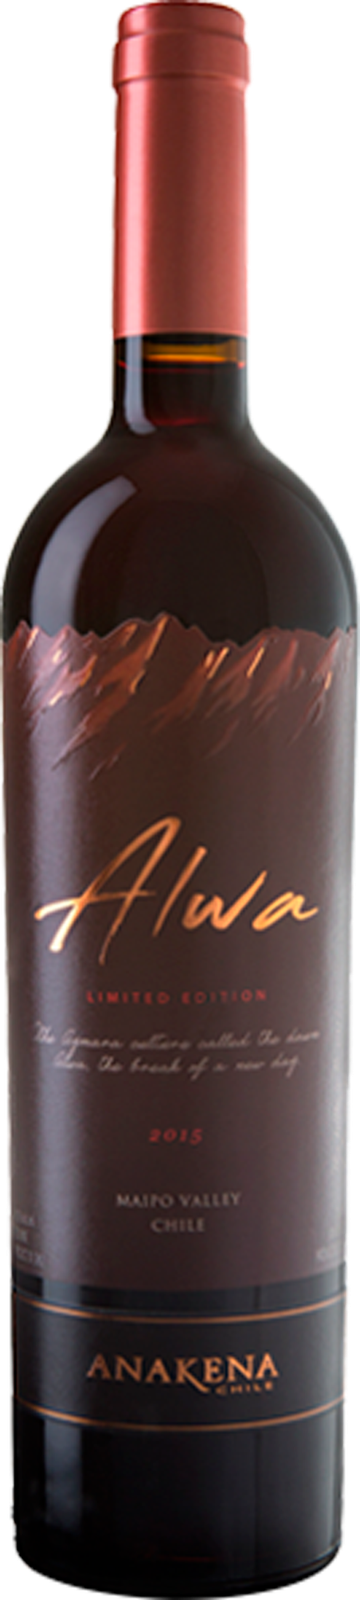 Rótulo Alwa Limited Edition Red Blend